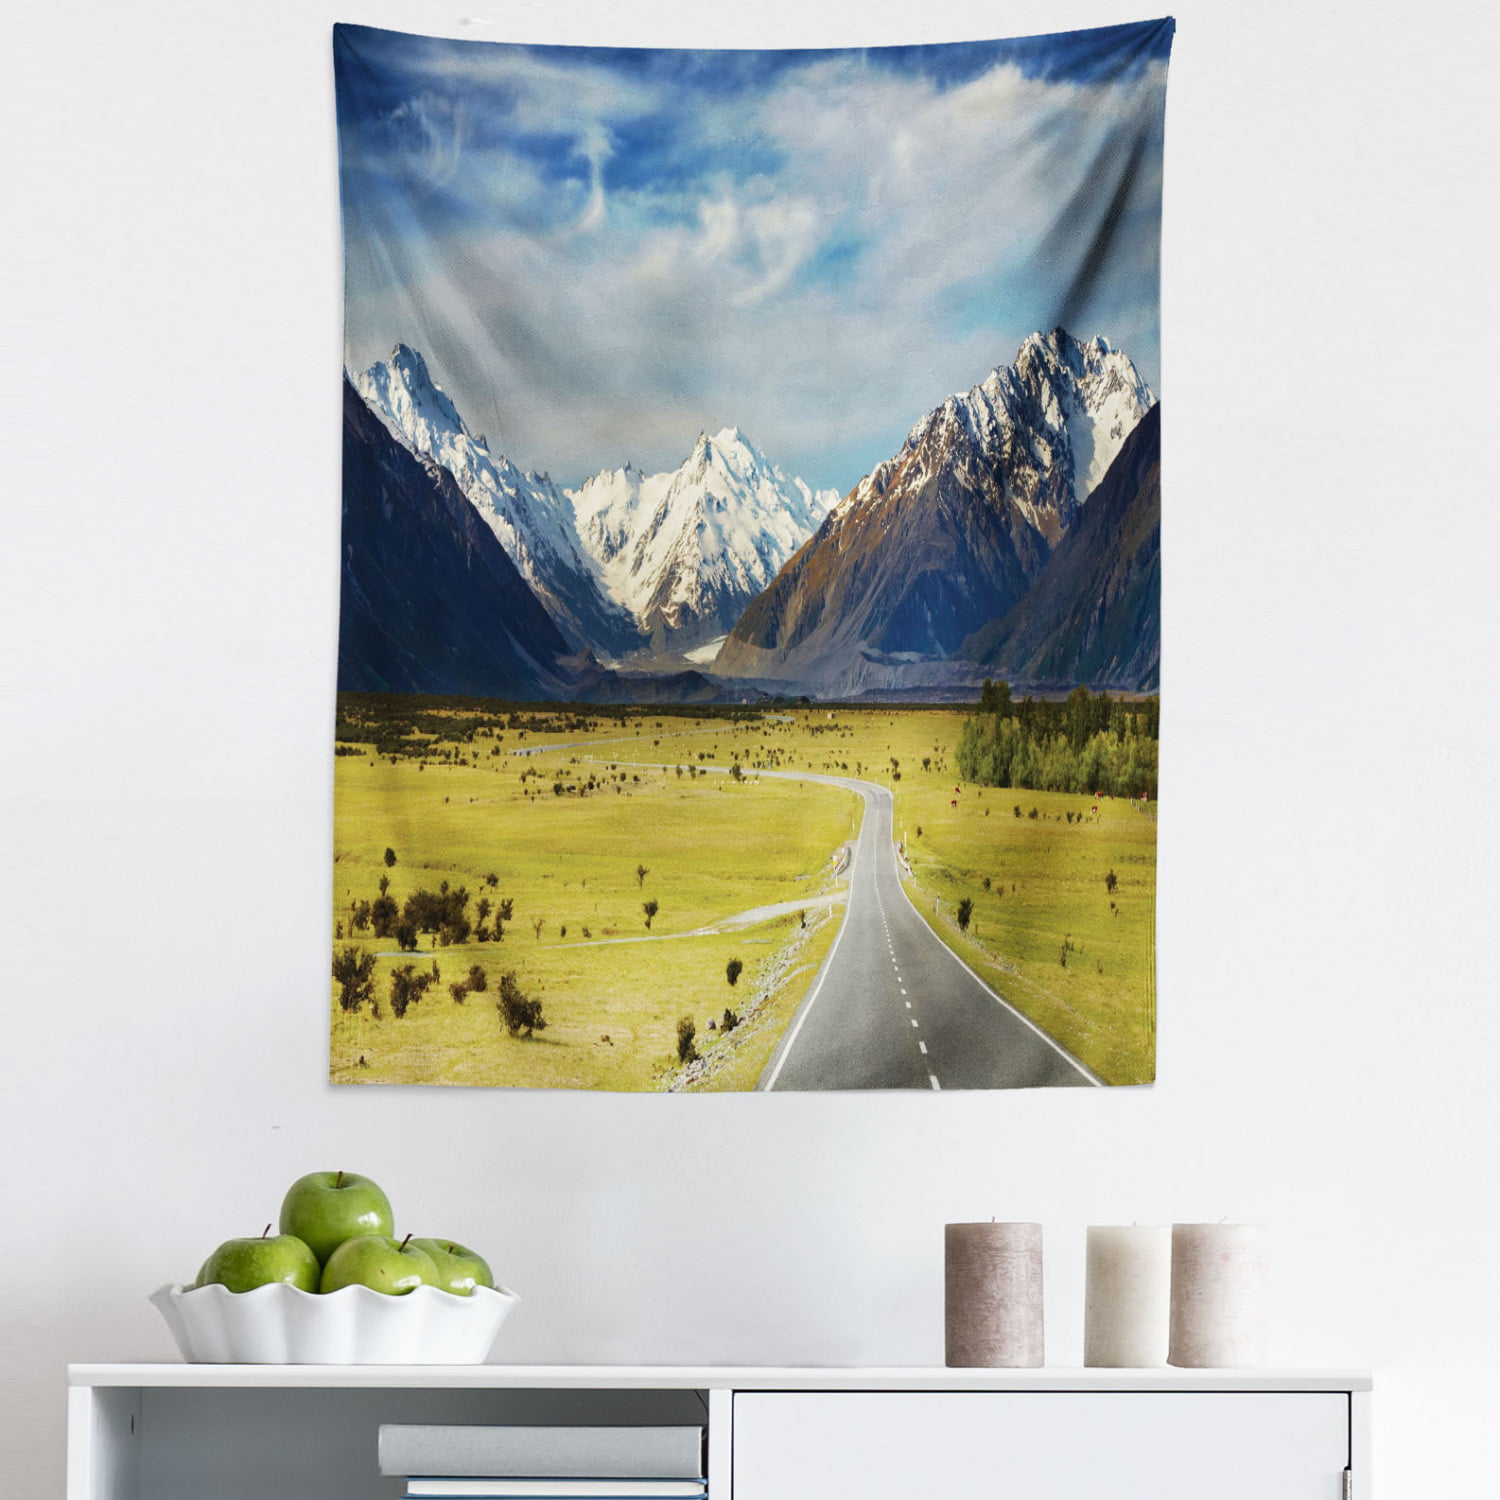 Scenery Tapestry, Landscape with Road and Snow Capped Mountains Southern  Alps New Zealand, Fabric Wall Hanging Decor for Bedroom Living Room Dorm,  Sizes, Navy Blue White Olive, by Ambesonne